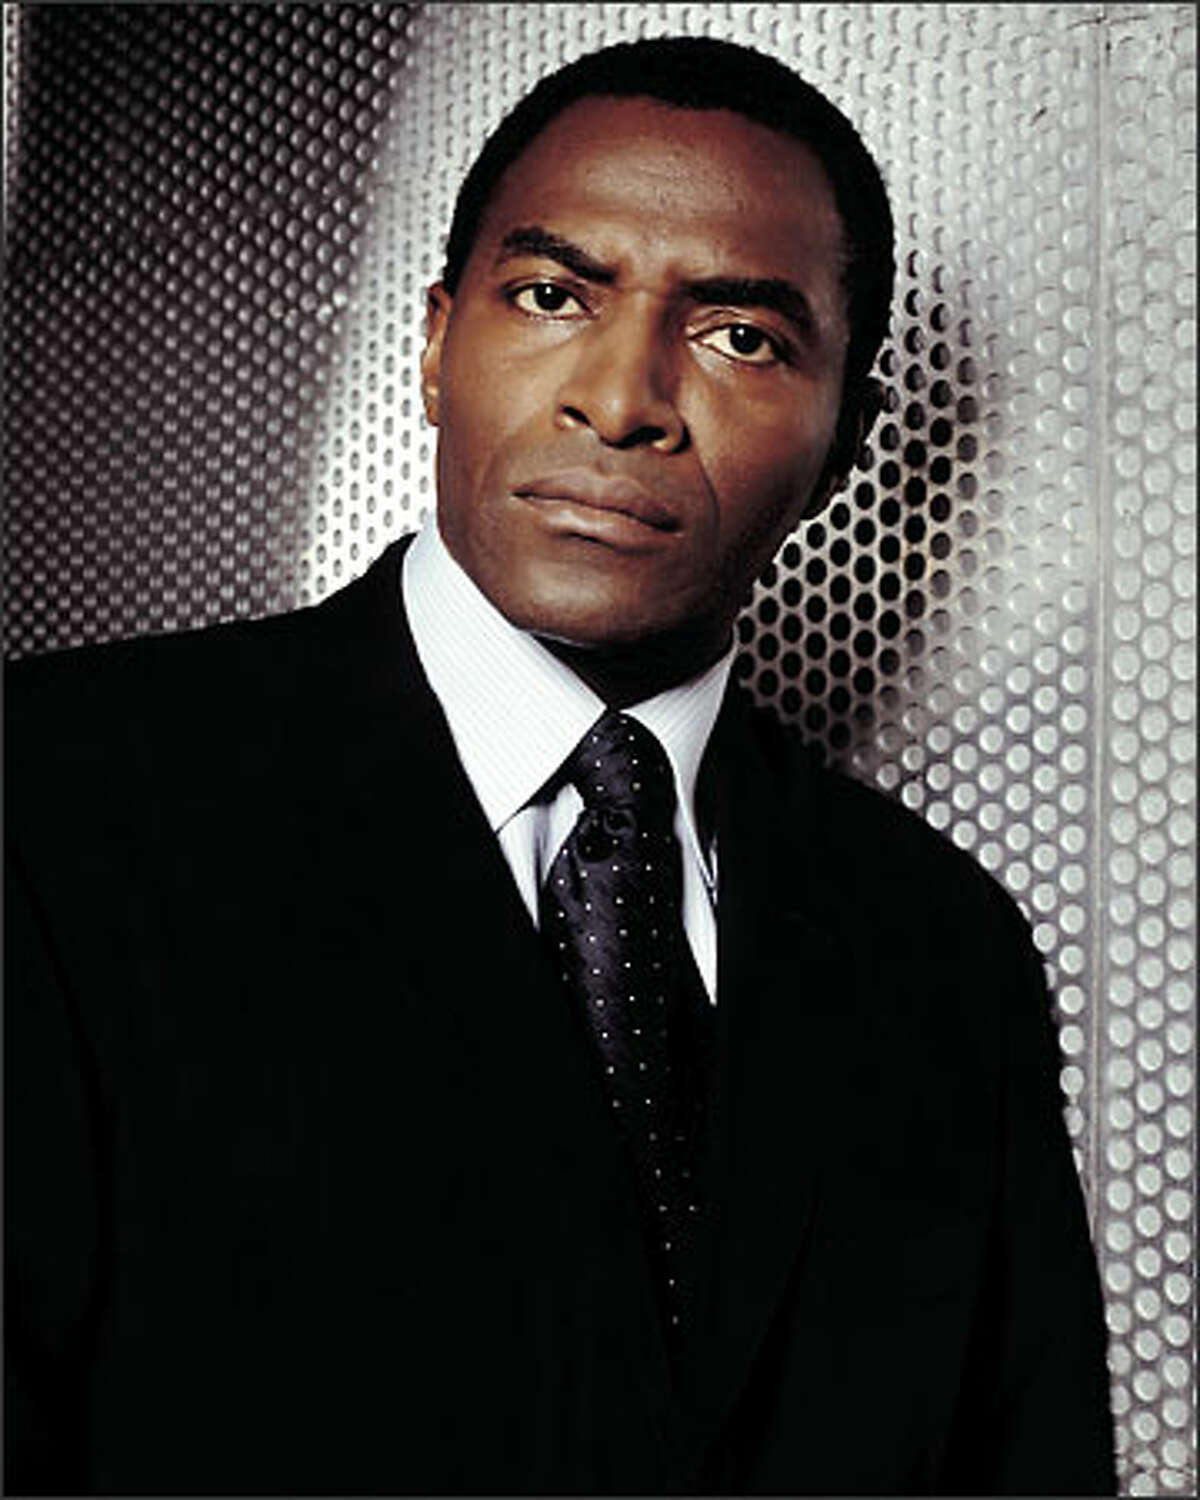 Sydney's one-time partner, Marcus Dixon (Carl Lumbly), has moved up the ladder at the CIA.